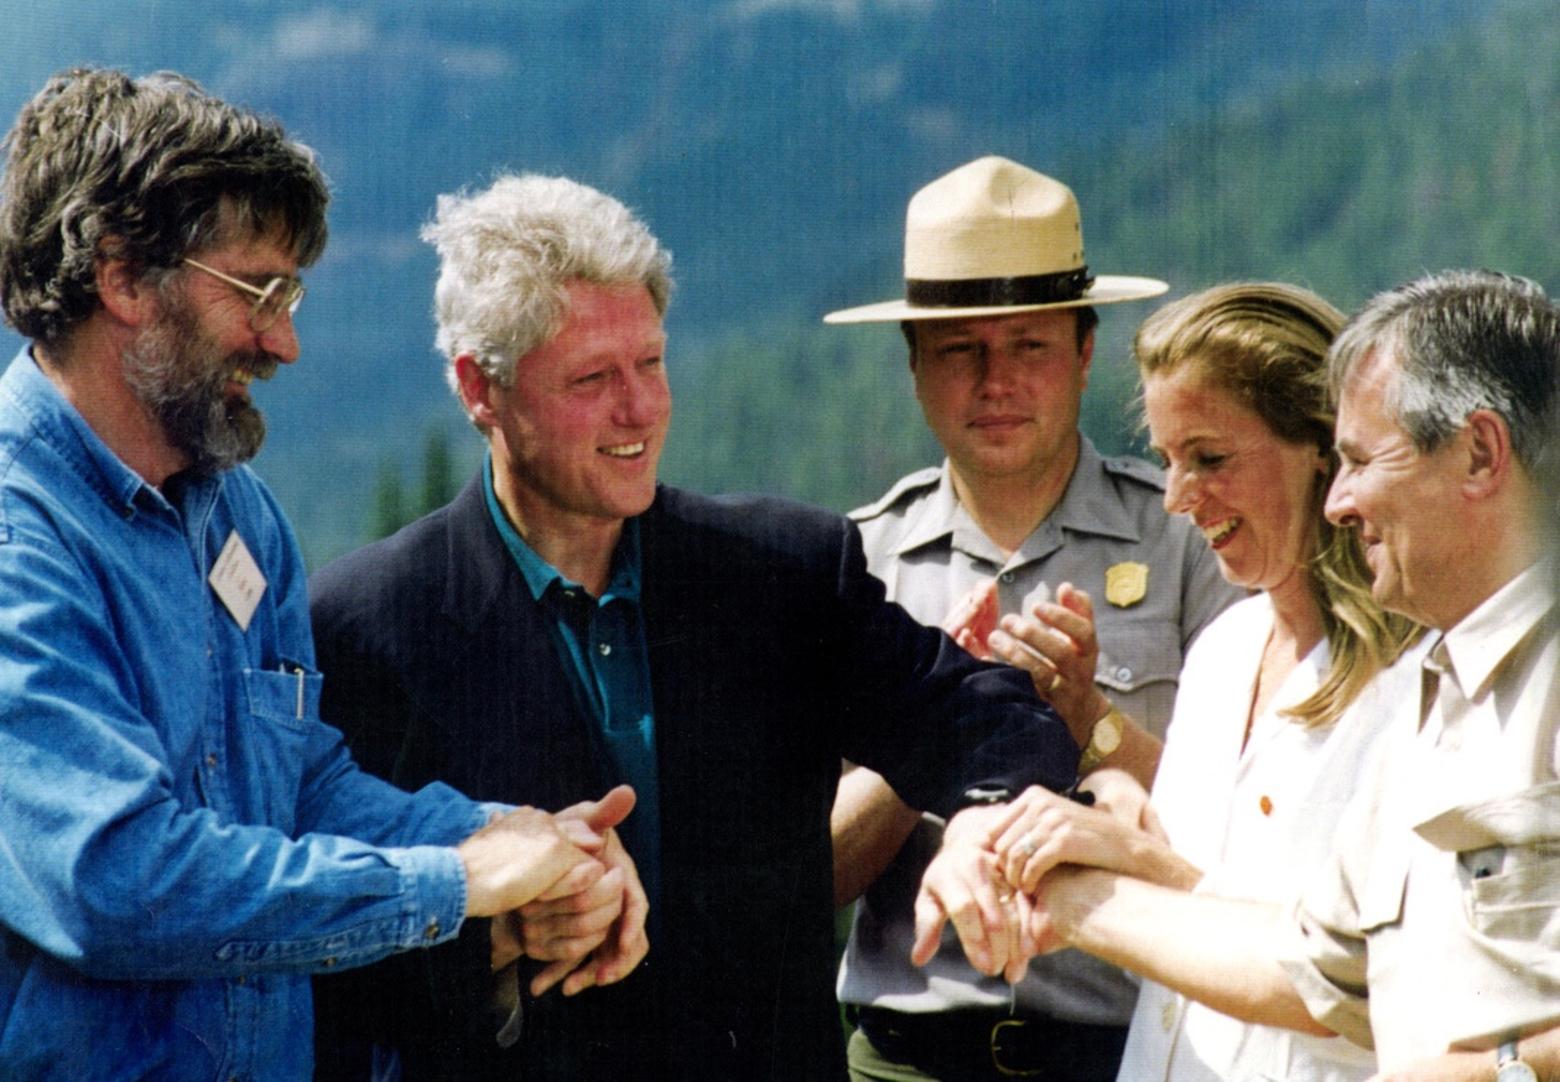 Postive outcome after a few nail-biting years: In August 1996, a momentous agreement was announced that stopped the threat of the New World Mine being built on the doorstep to Yellowstone. Taking part in the signing, witnessed by a few hundred people who looked on, were Mike Clark an next to him, left to right,: President Bill Clinton, Yellowstone Superintendent Mike Finley, Katie McGinty, director of The White House Office on Environmental Quality, and Ian Bayer, CEO of Canadian mining company, Hemlo Gold that owned the mine through corporate giant, Noranda. Photo courtesy Mike Clark/MSU Library Special Collections